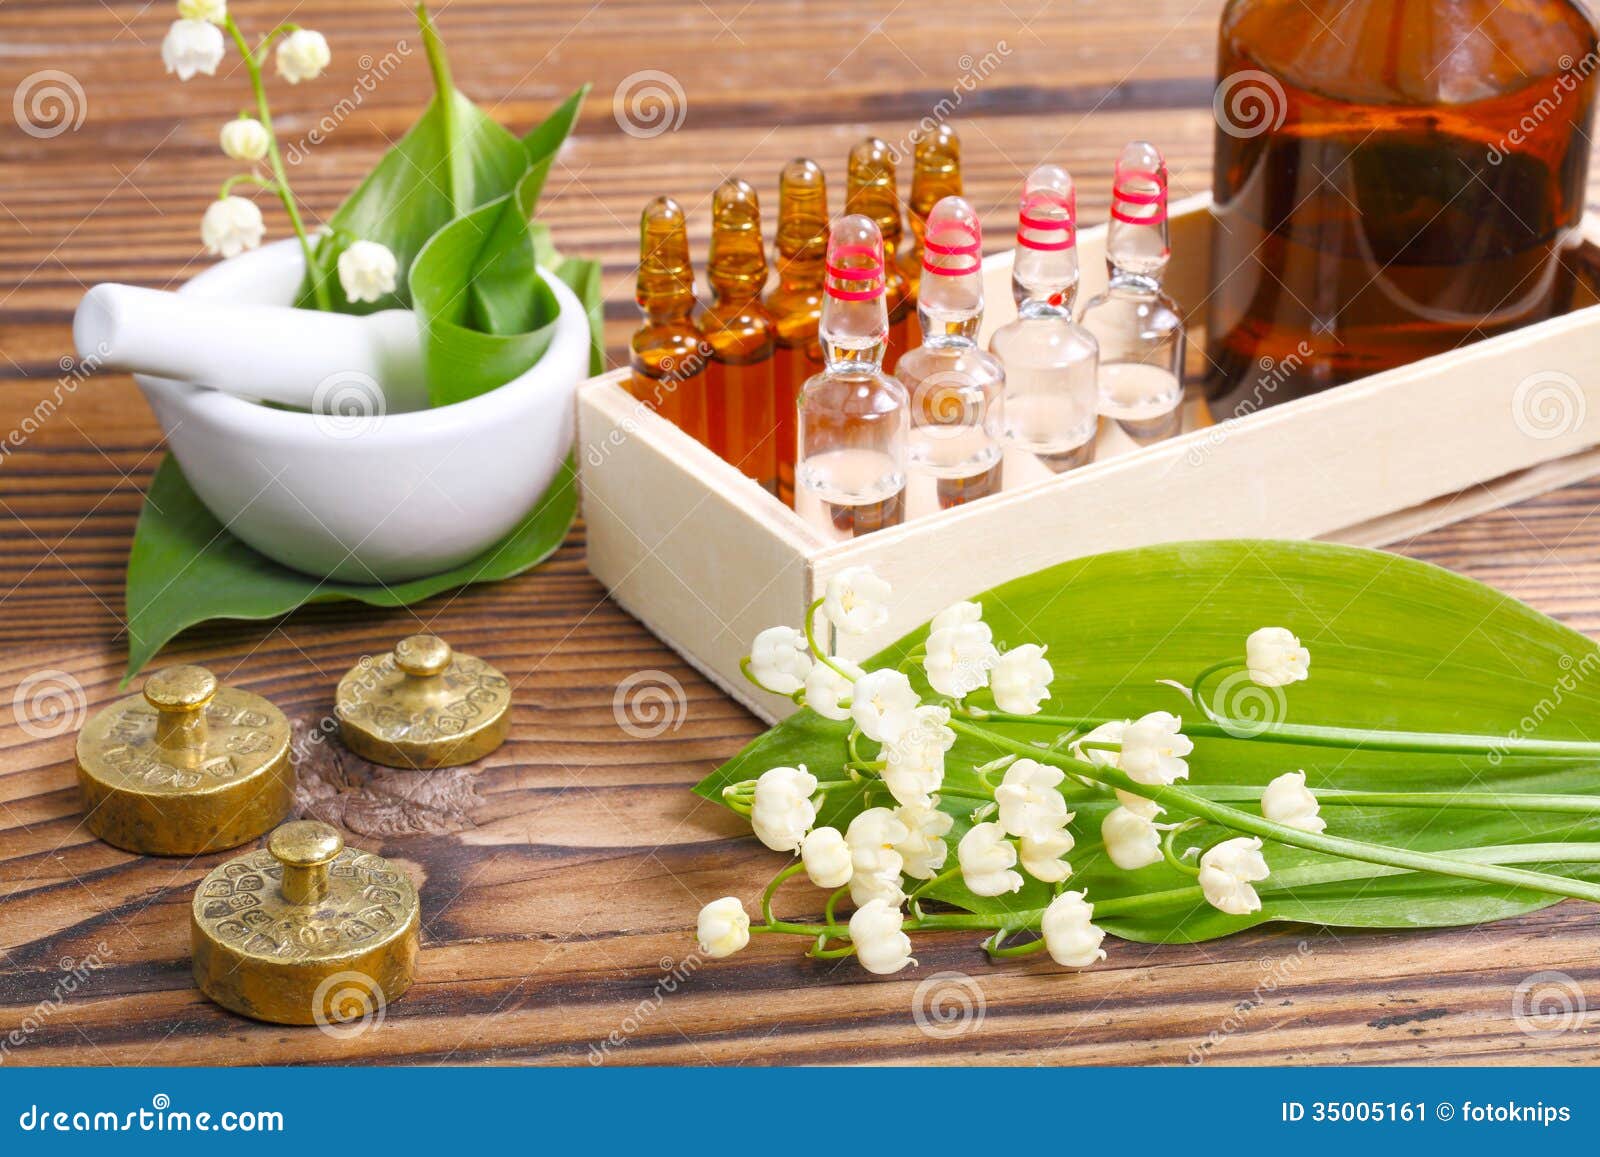 Lilies Of The Valley And Essential Oil In Vial Stock Photo